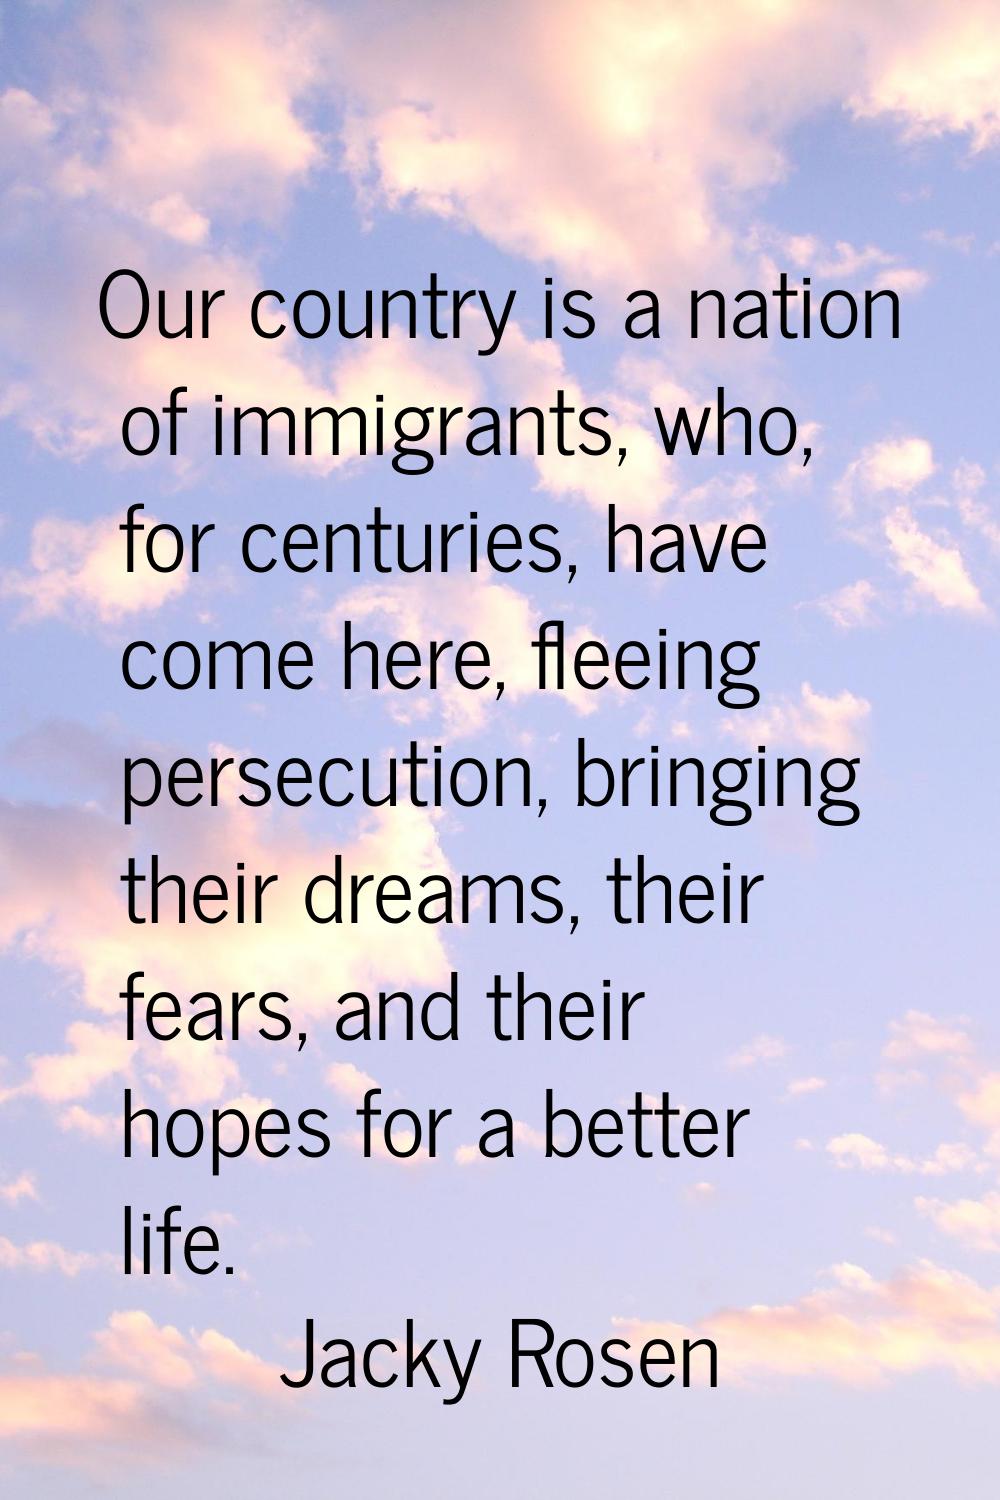 Our country is a nation of immigrants, who, for centuries, have come here, fleeing persecution, bri